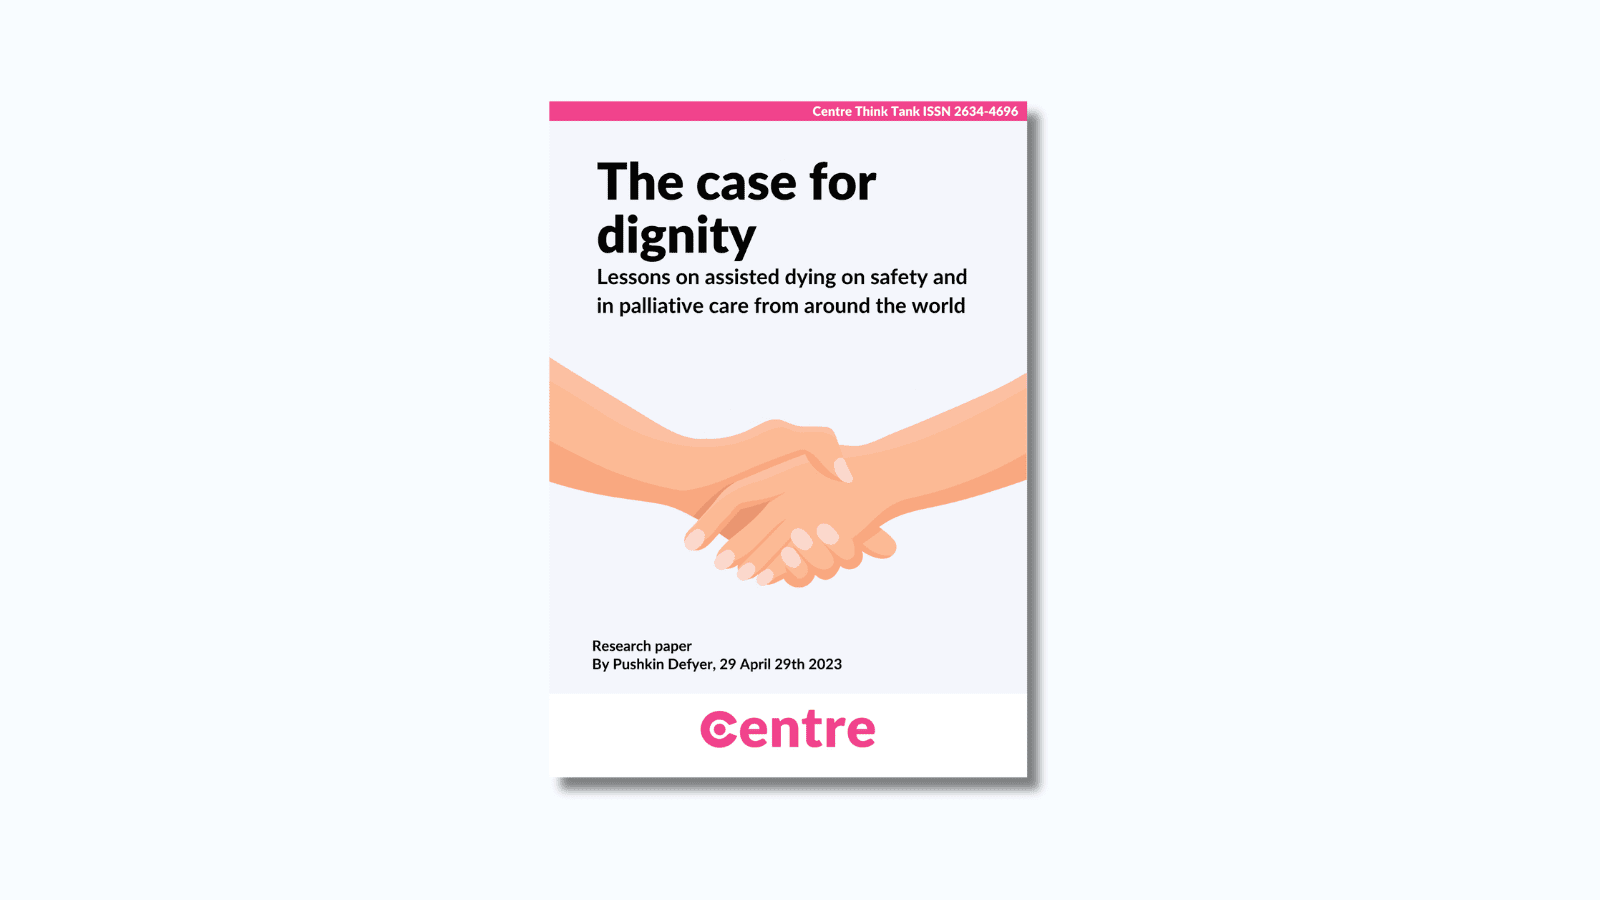 A pink strip at the top of the paper with the words: "Centre Think Tank ISSN 2634-4696". The paper is titled "The case for dignity: Lessons on assisted dying on safety and in palliative care from around the world". Below is a light blue section with two hands holding each other. Below this is the words: "Research paper. By Pushkin Defyer, 29th April 2023. At the bottom is a white strip with the Centre logo in pink beneath.